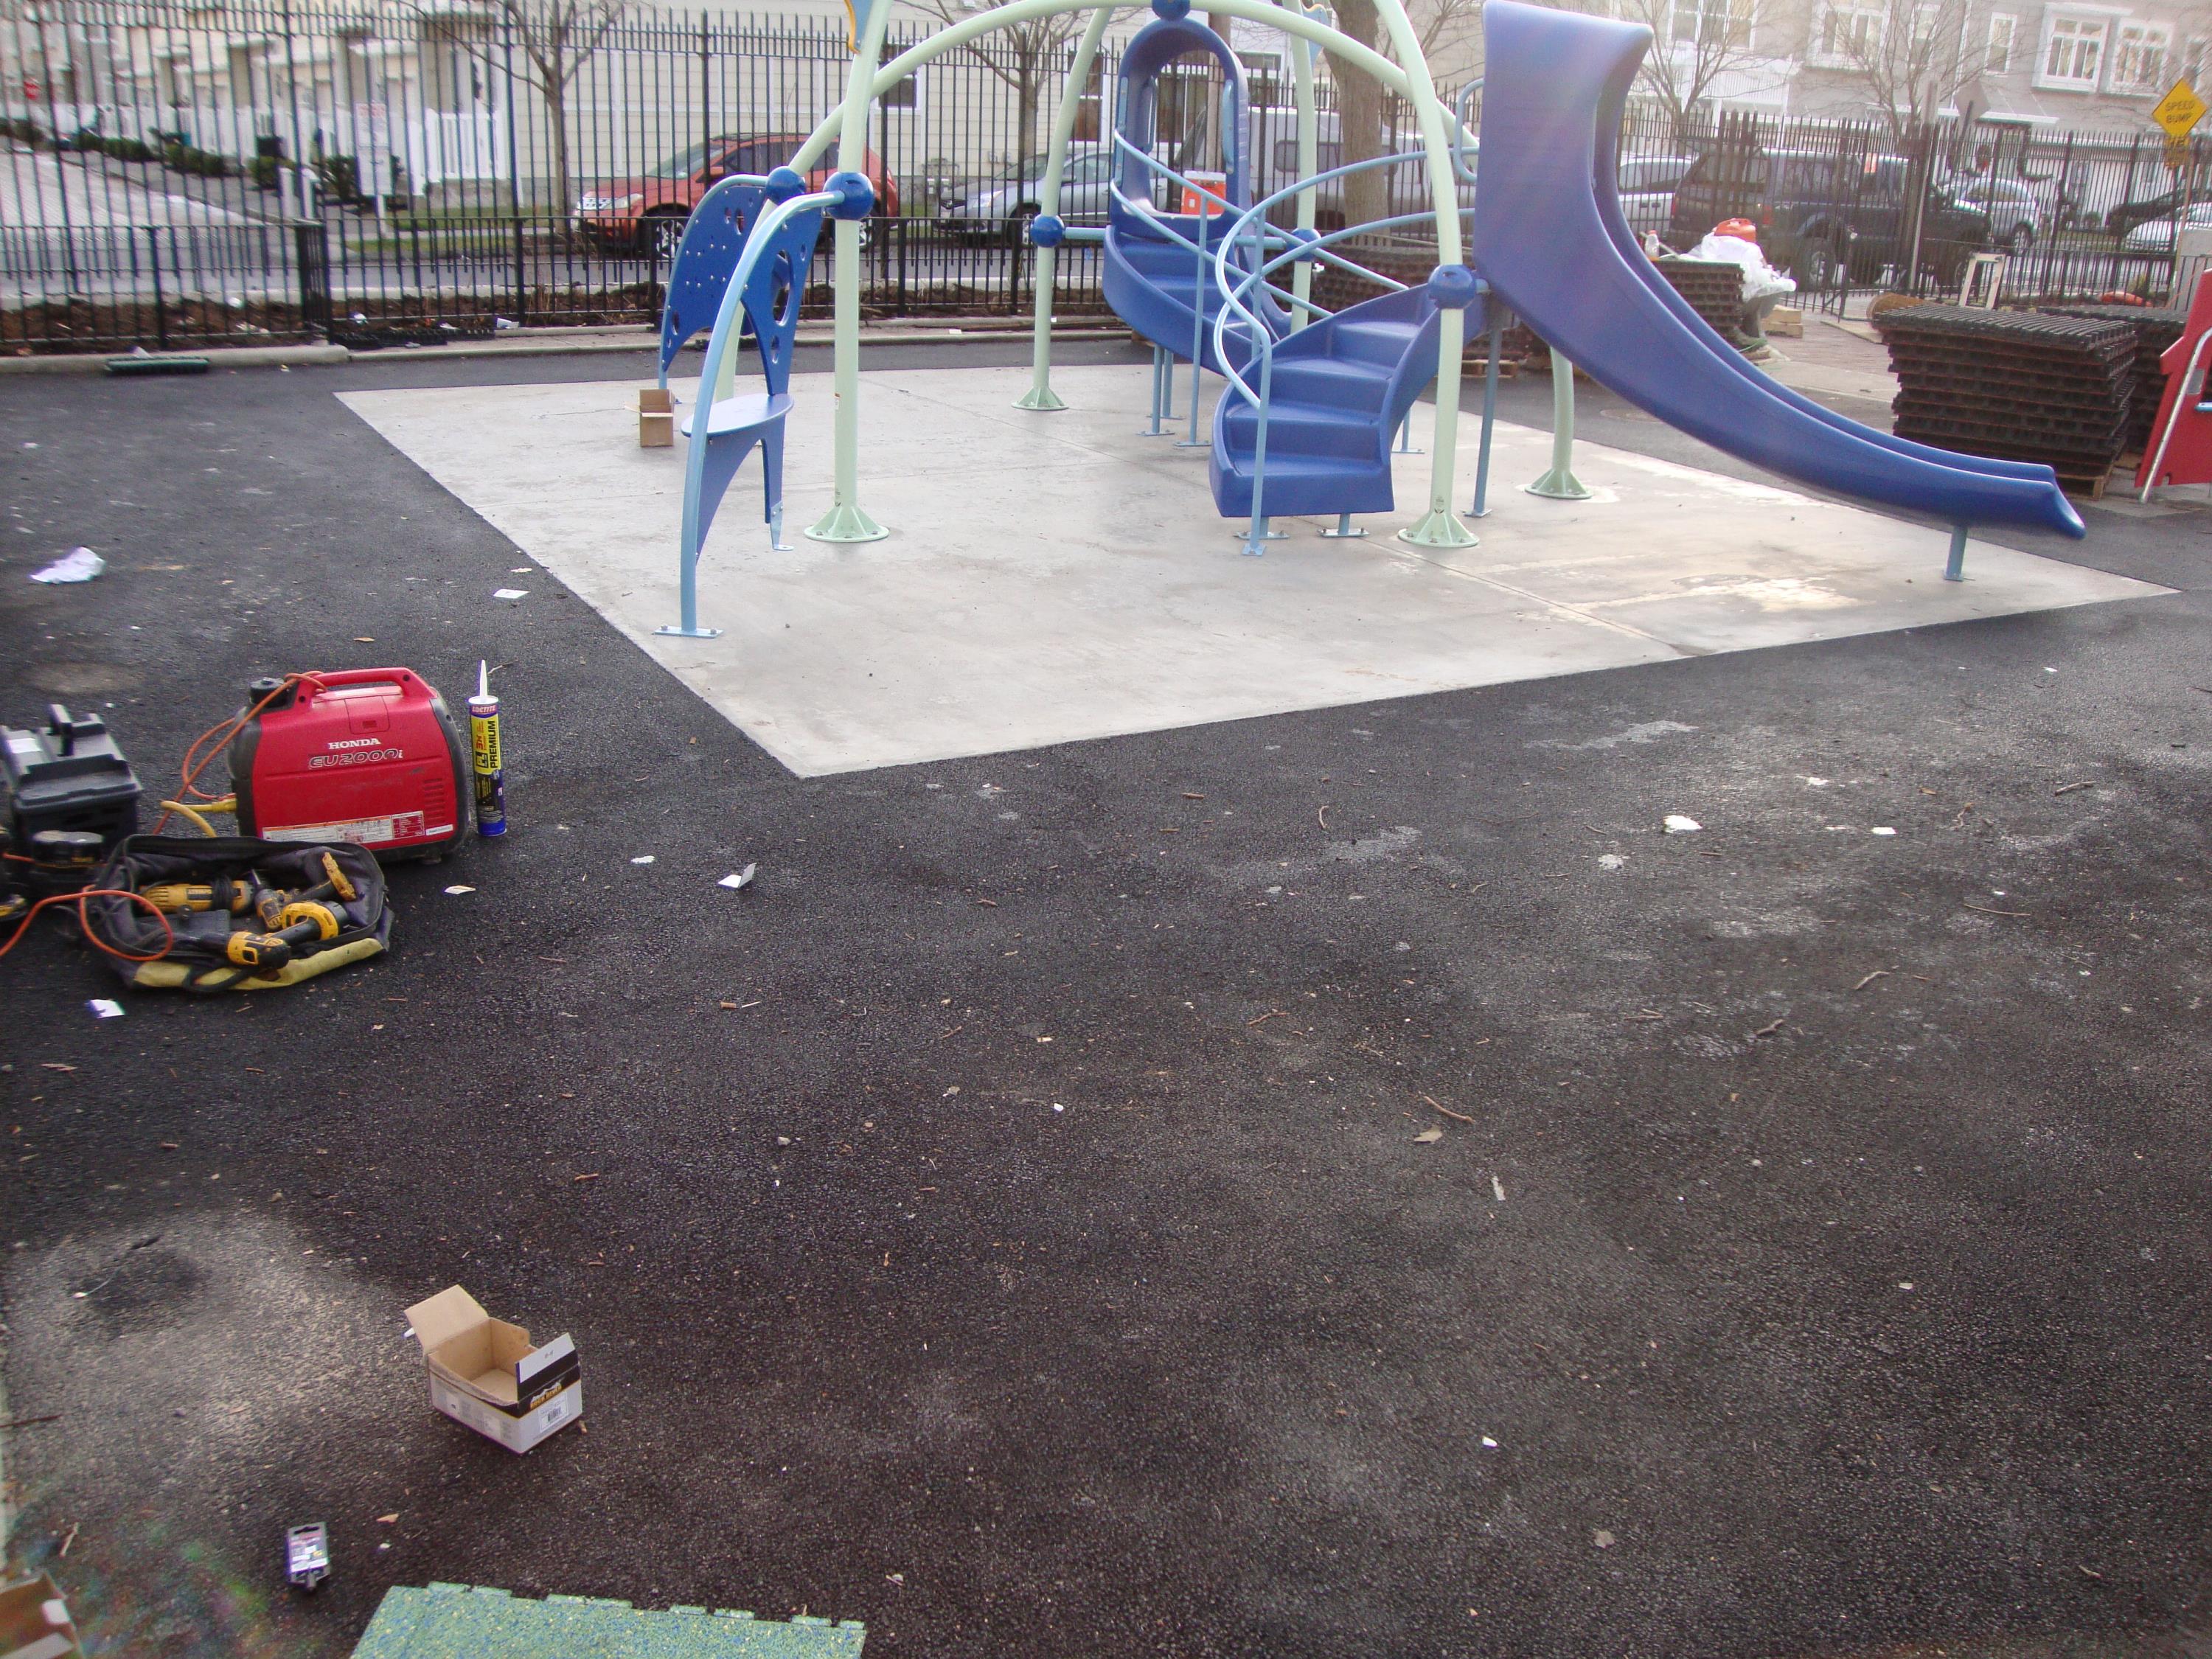 City Park Playground w/Storm Water Mgt Issues c